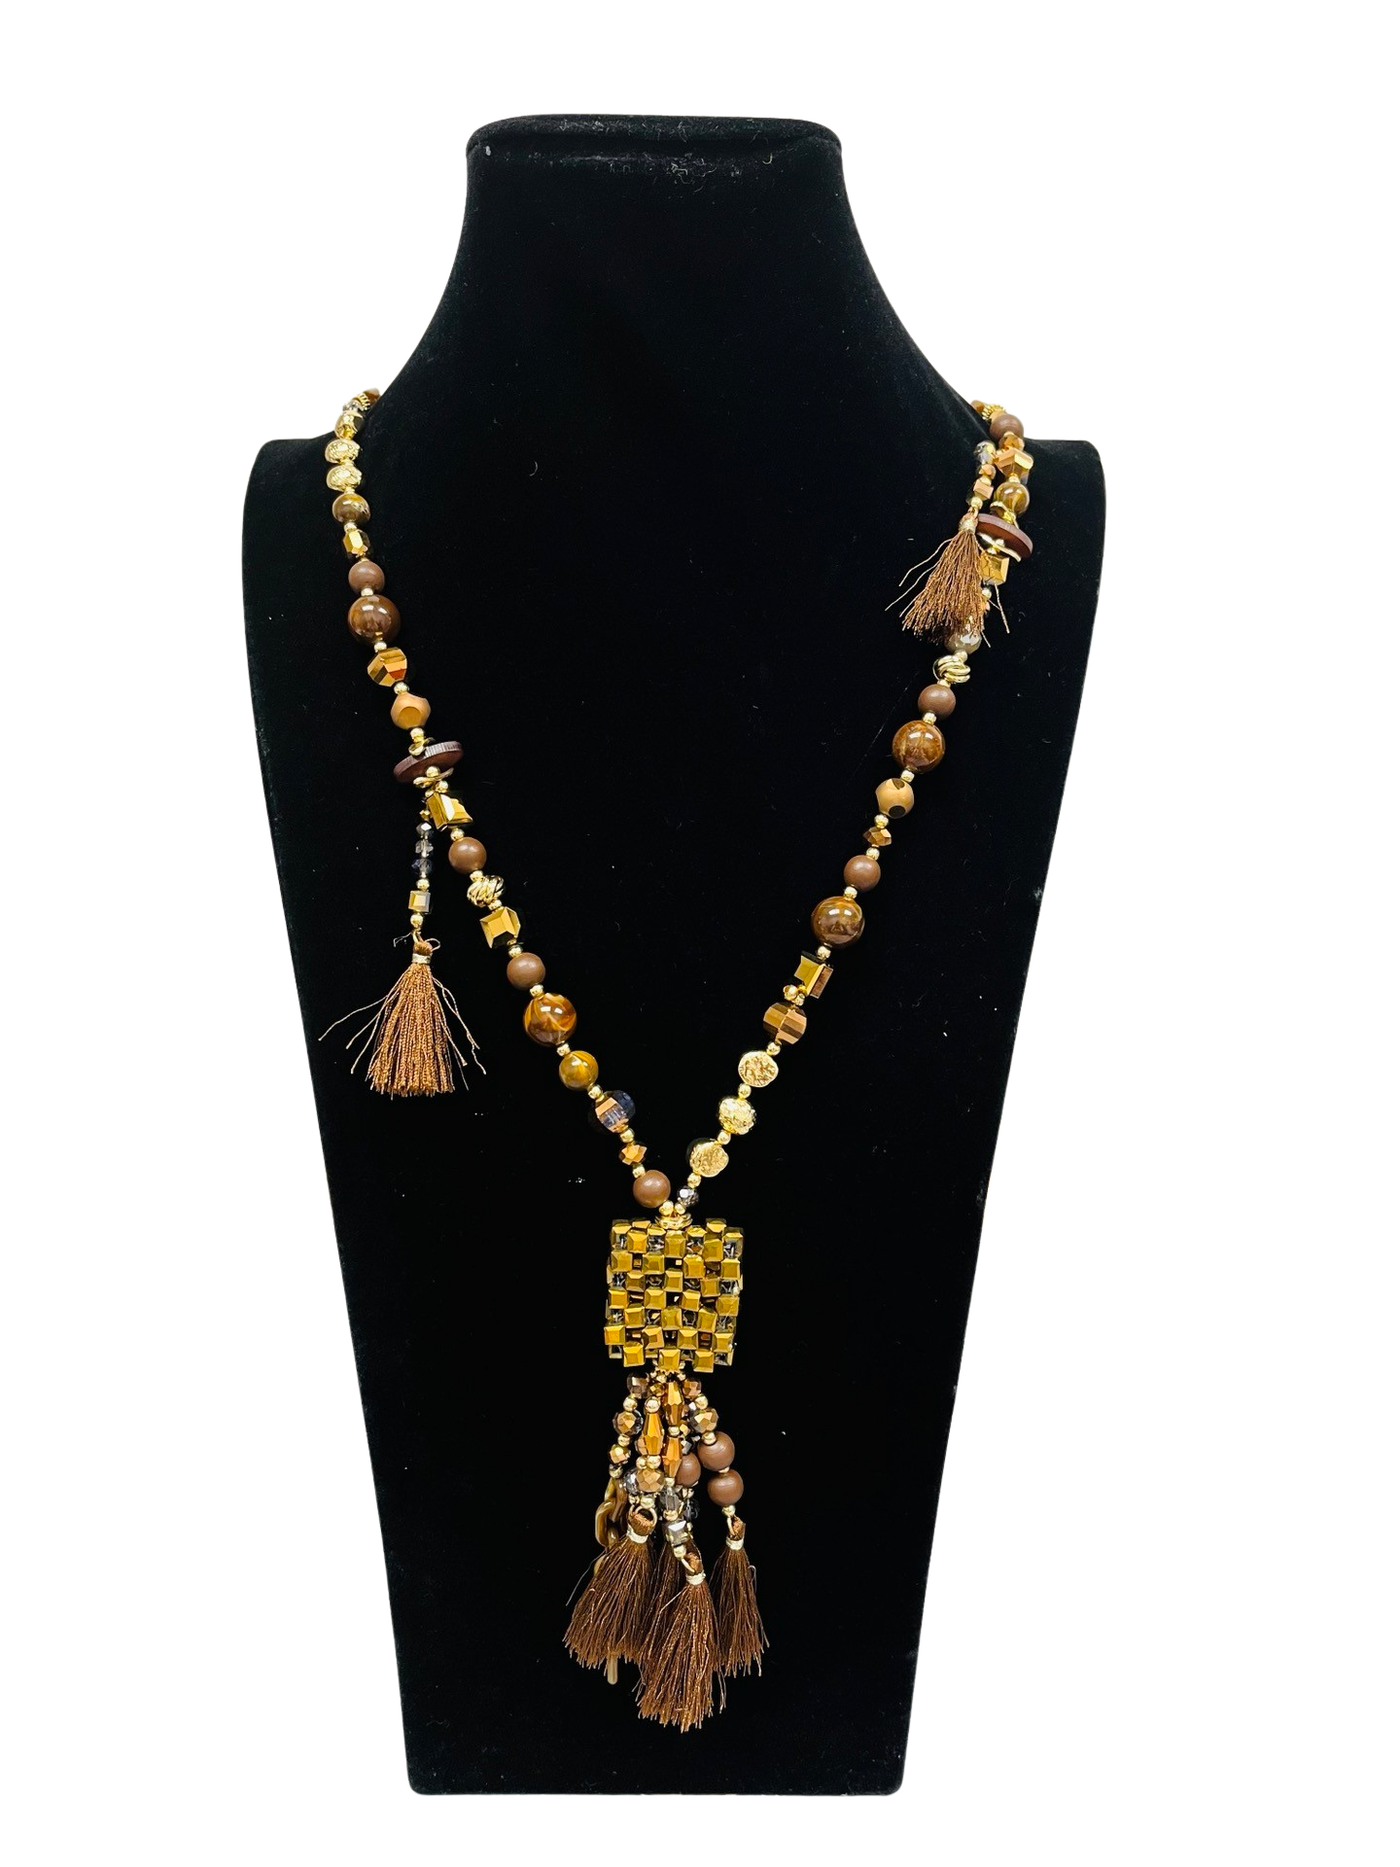 Tan Long Statement Necklace